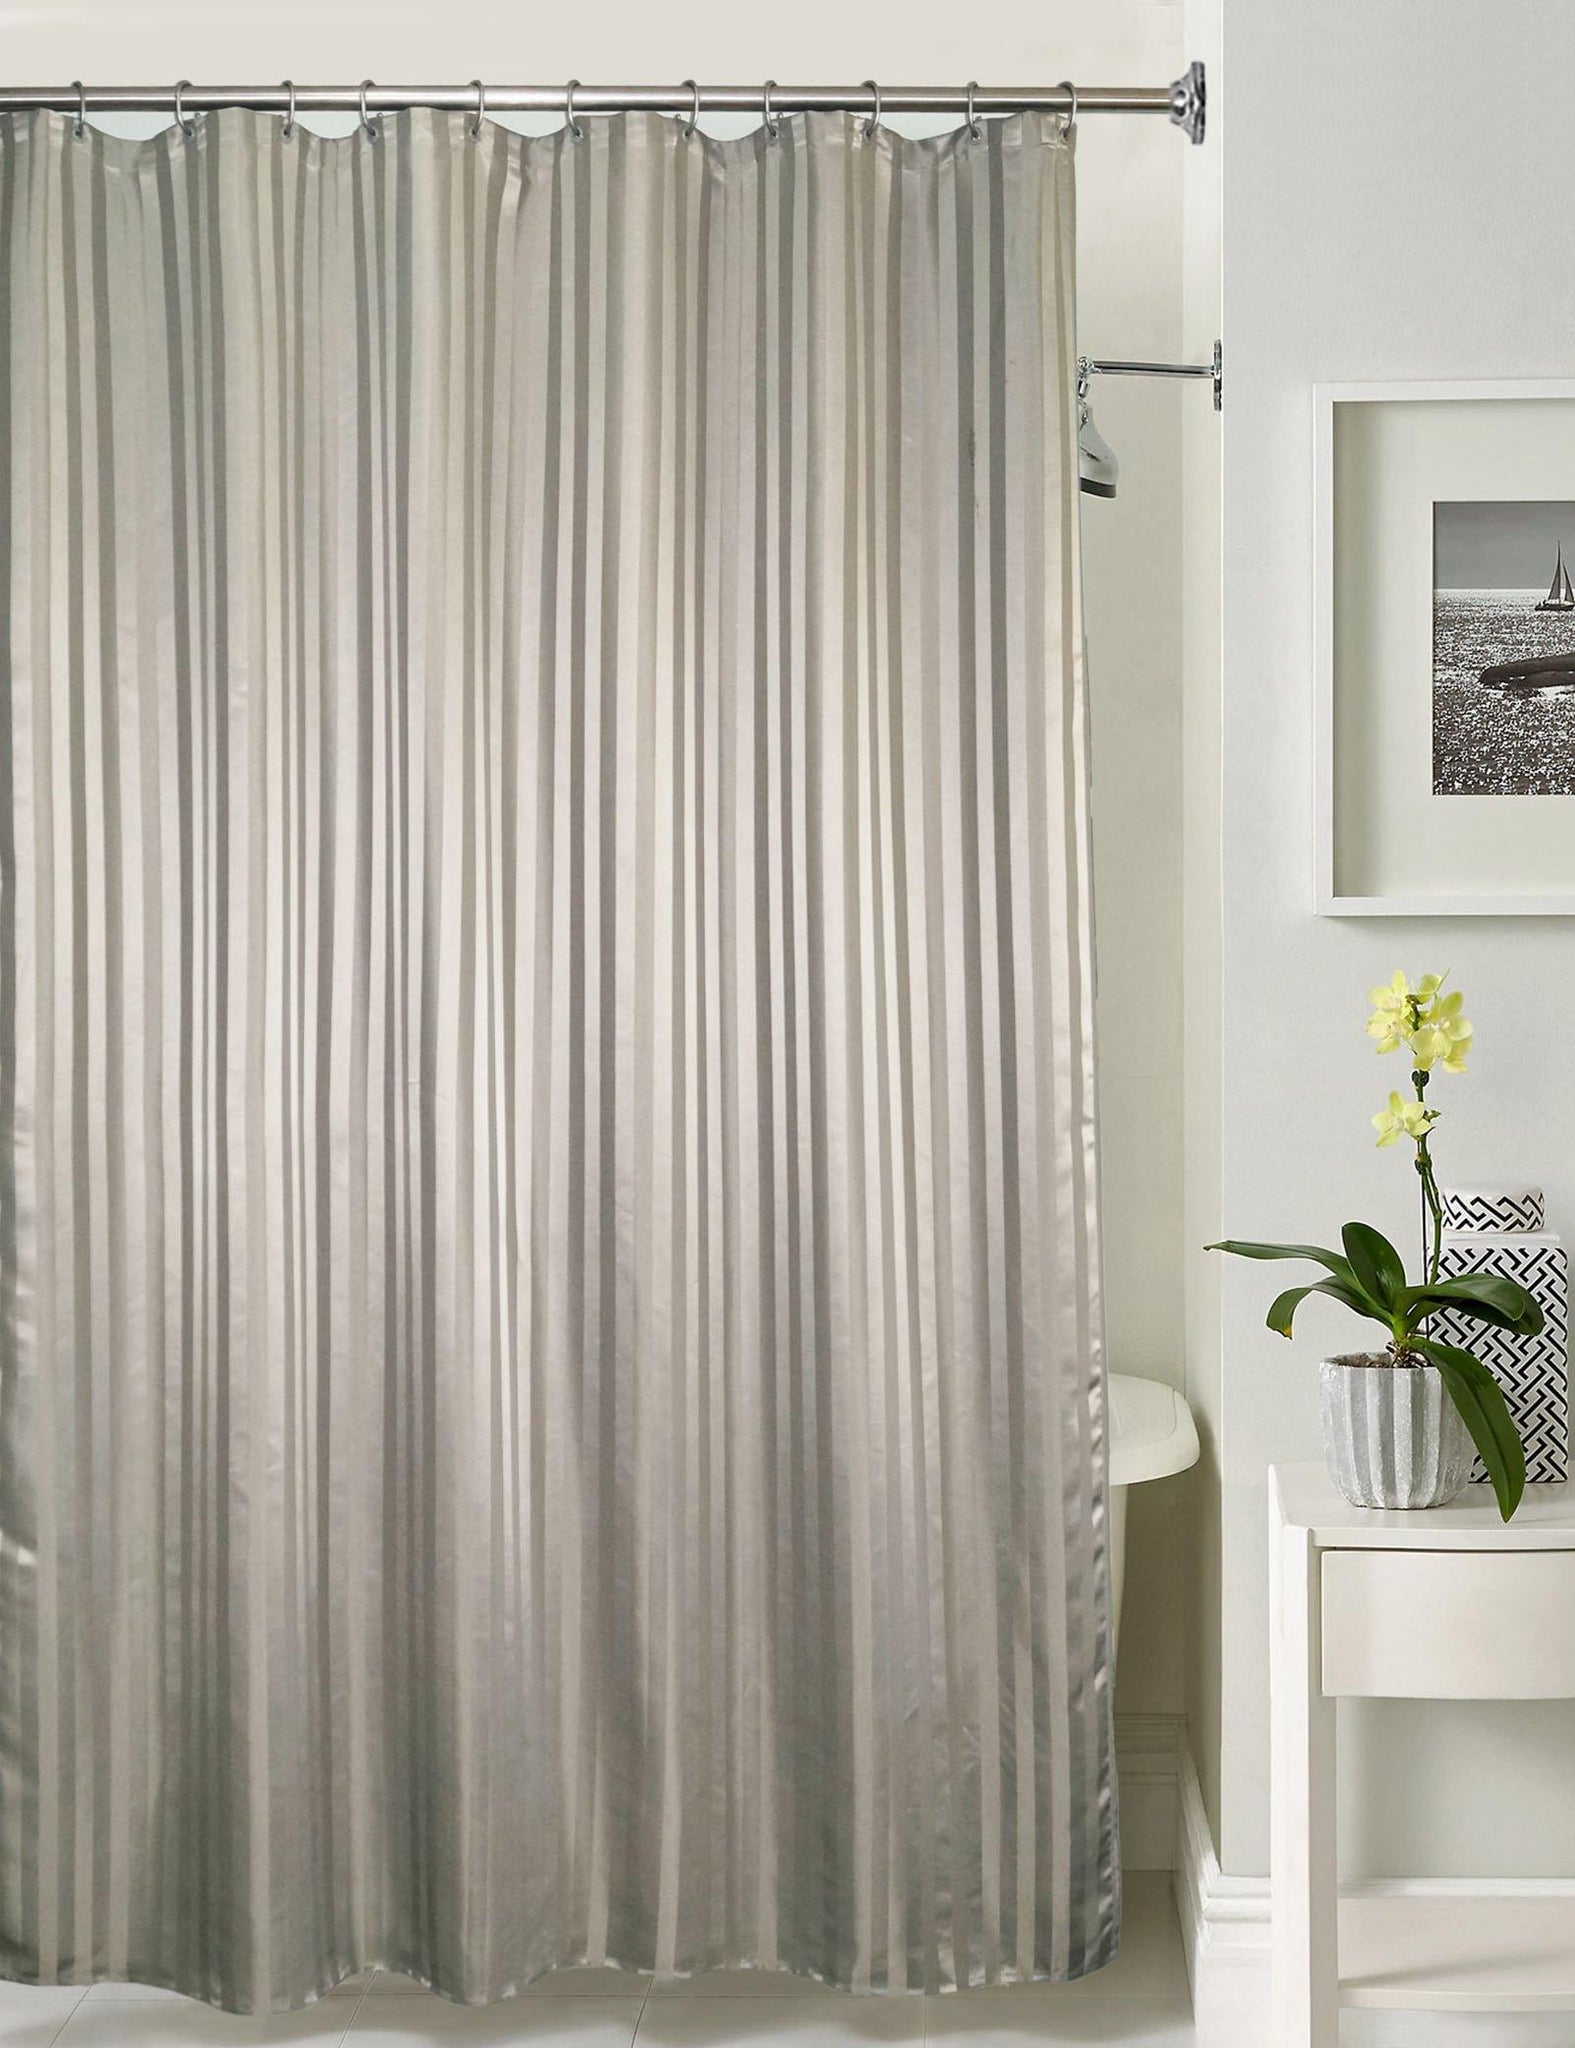 Lushomes Grey Stripe Waterproof Bathroom Shower Curtain with 12 Eyelets and 12 C-hooks - Lushomes